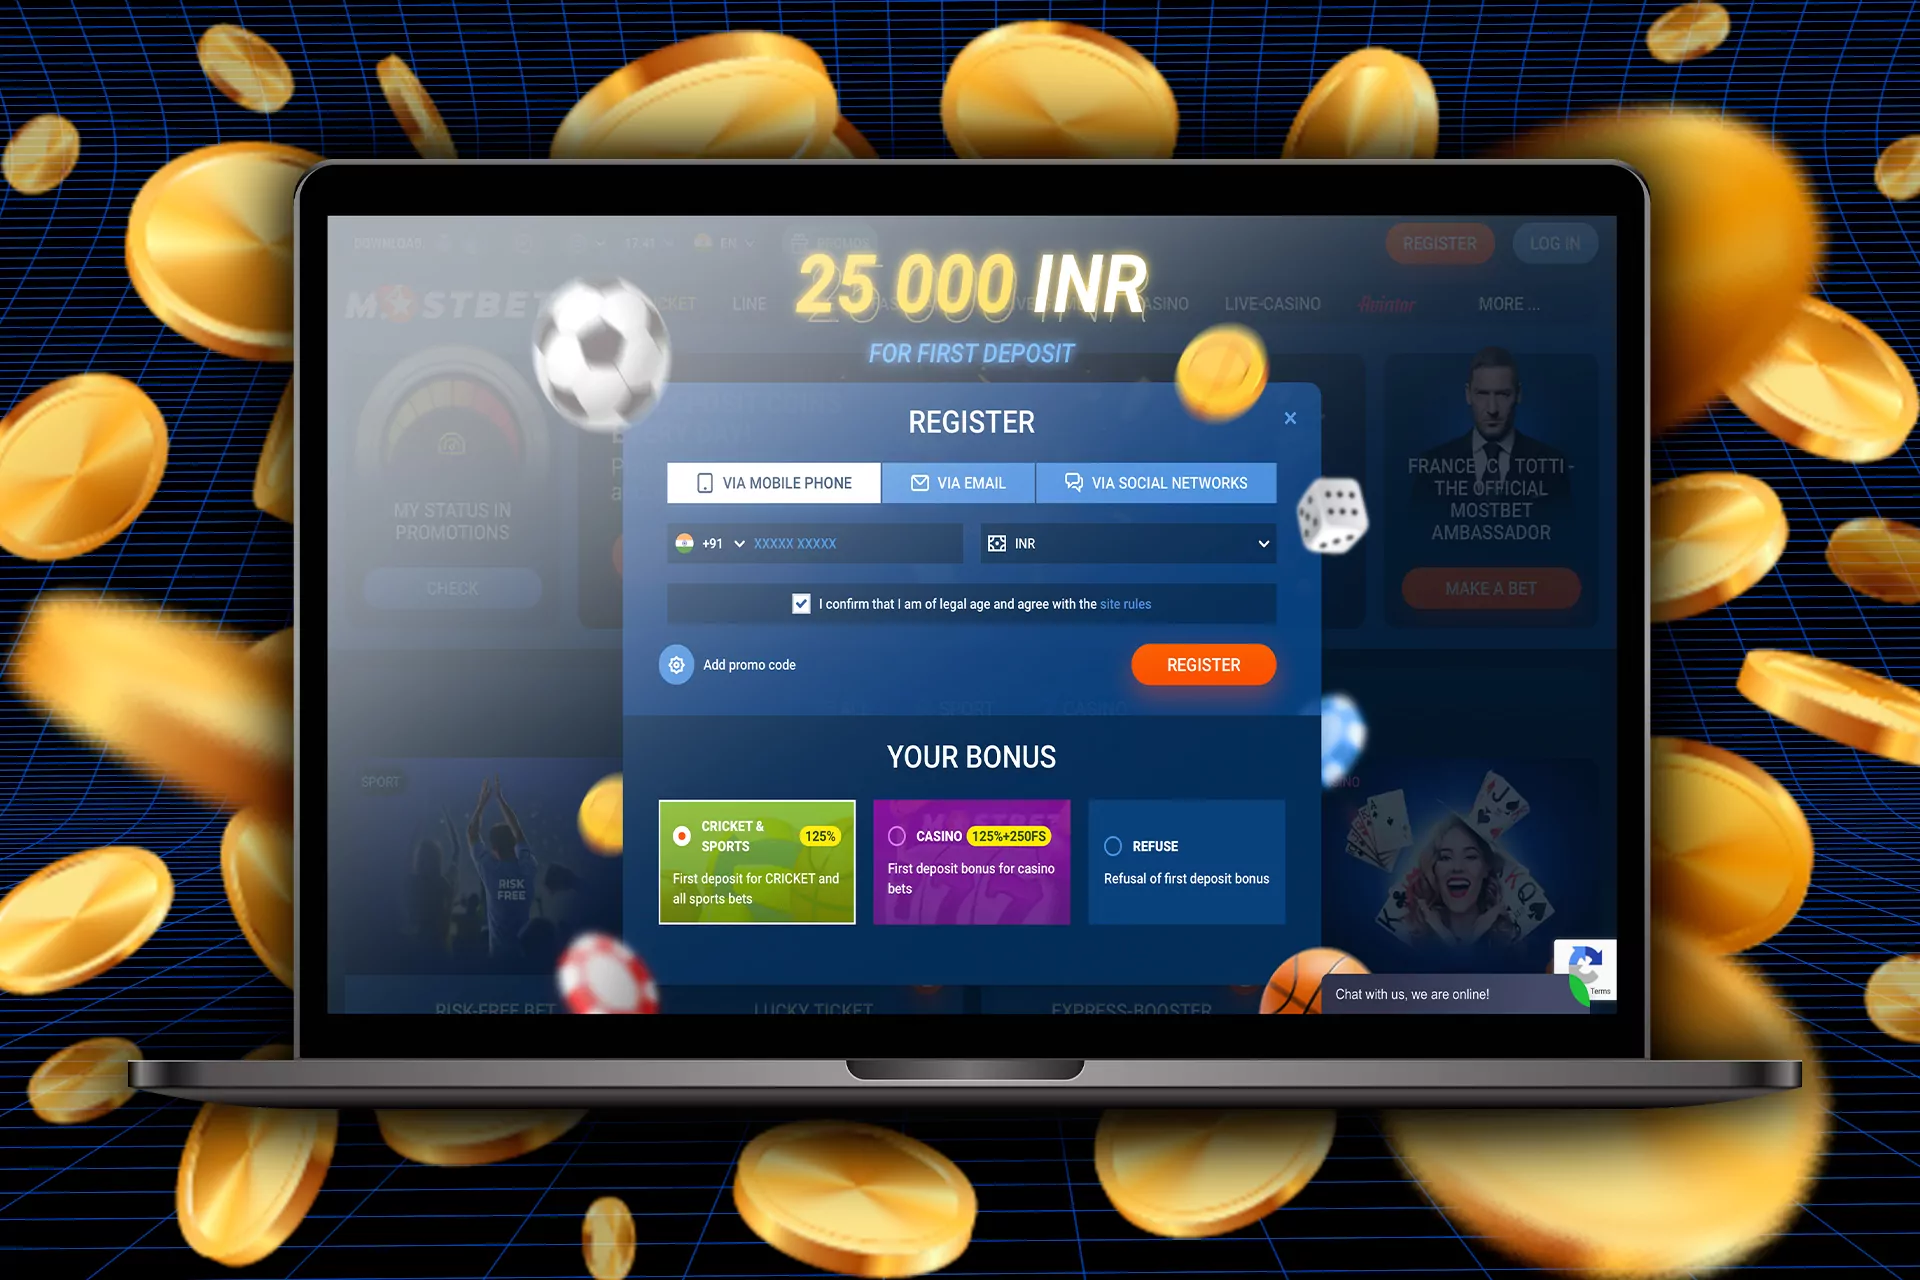 To get the welcome bonus, you need to choose it during the registration at Mostbet.